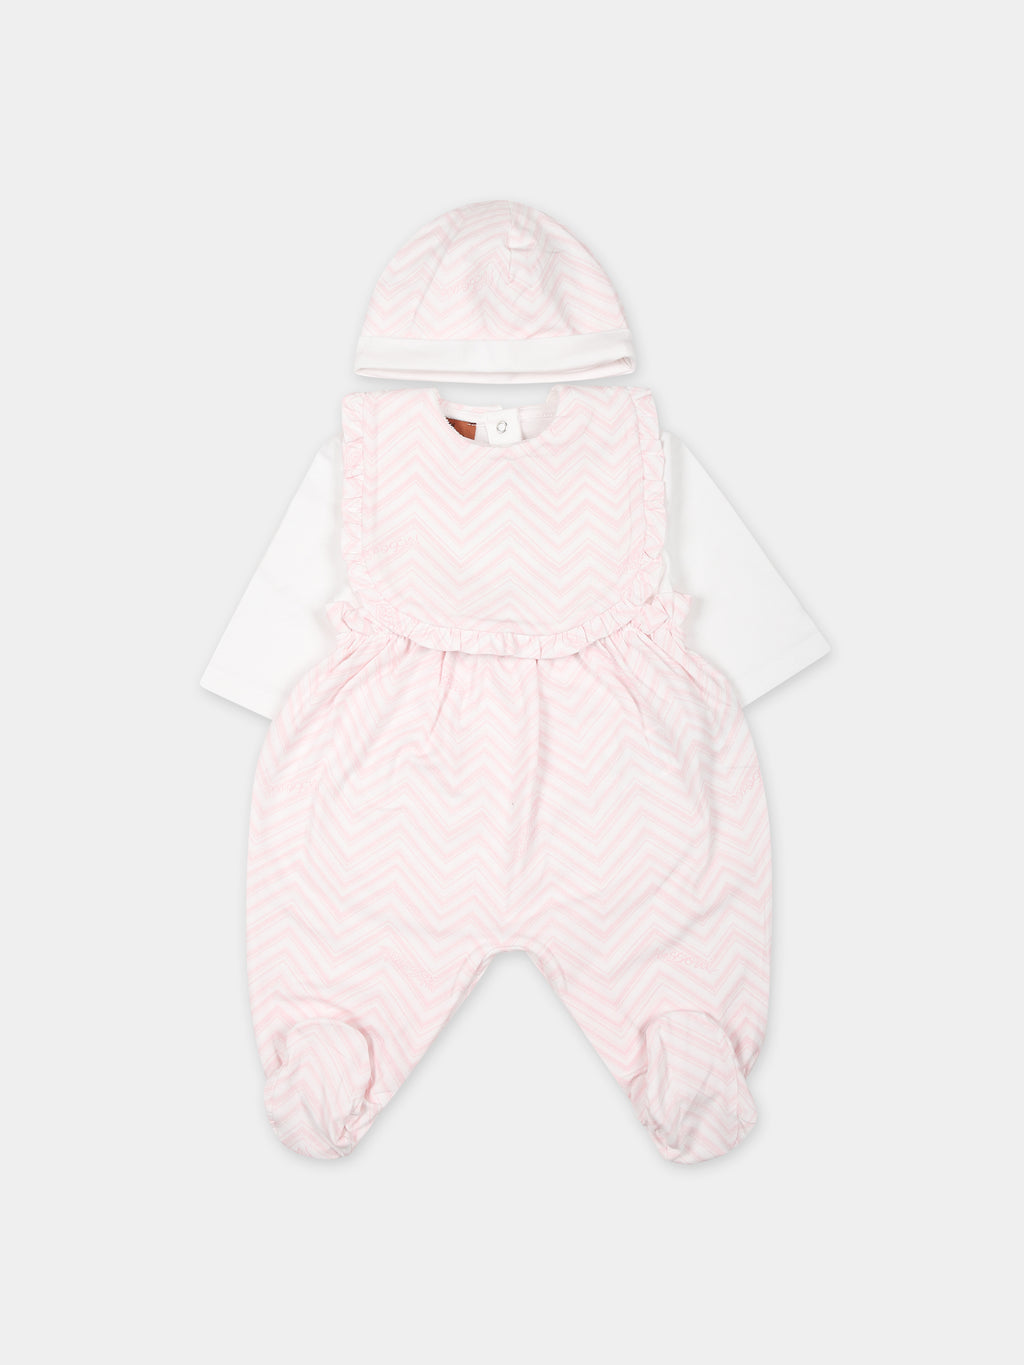 White set for baby girl with chevron pattern